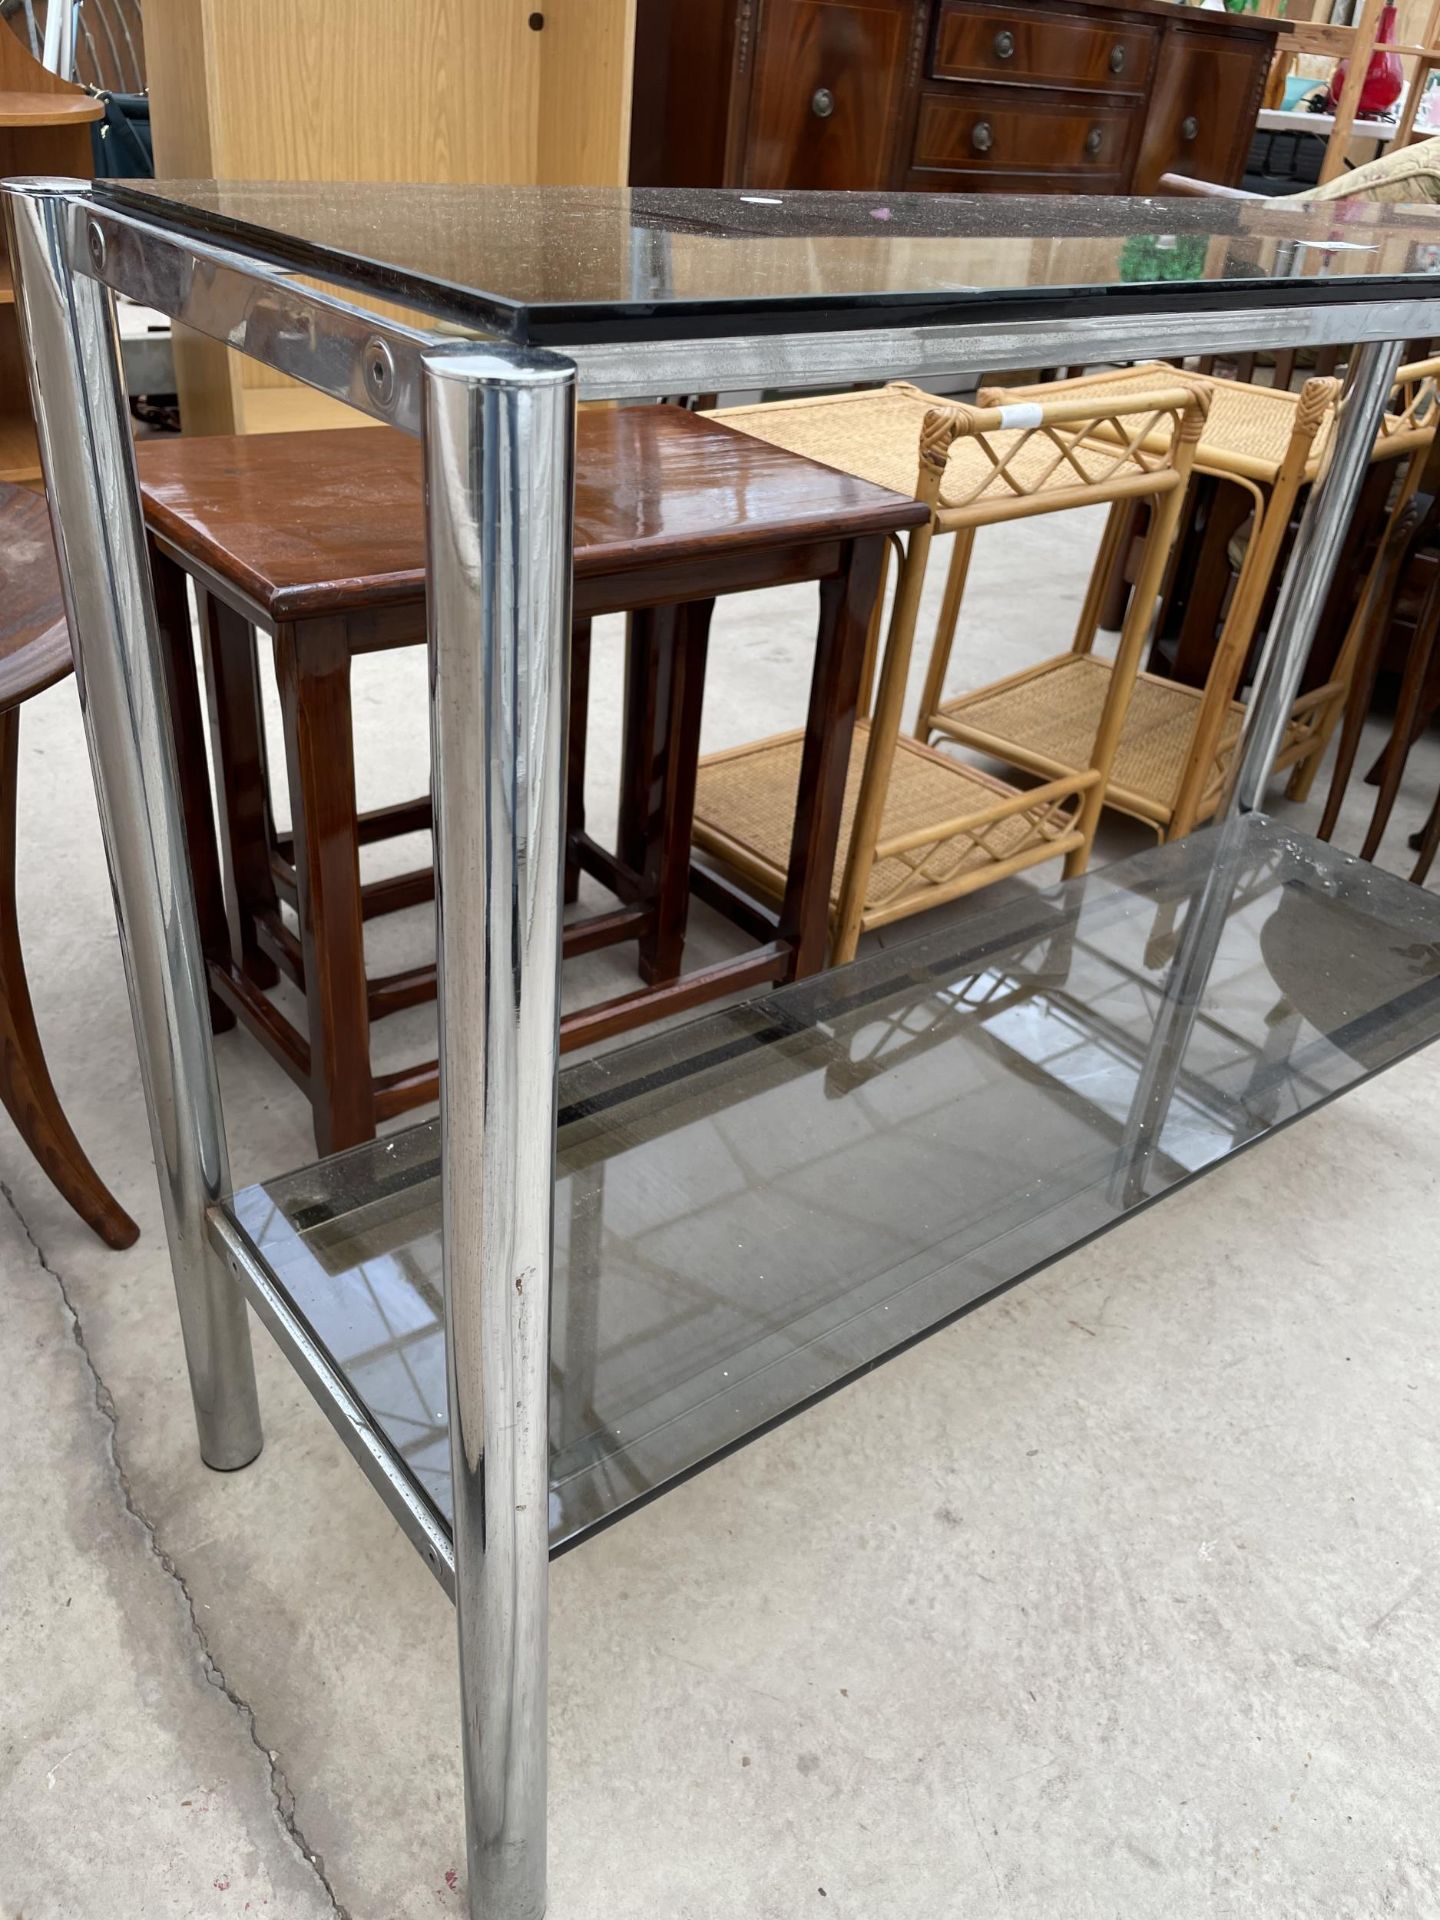 A MODERN TWO TIER CONSOLE TABLE WITH GLASS SHELVES, 41" WIDE - Image 2 of 2